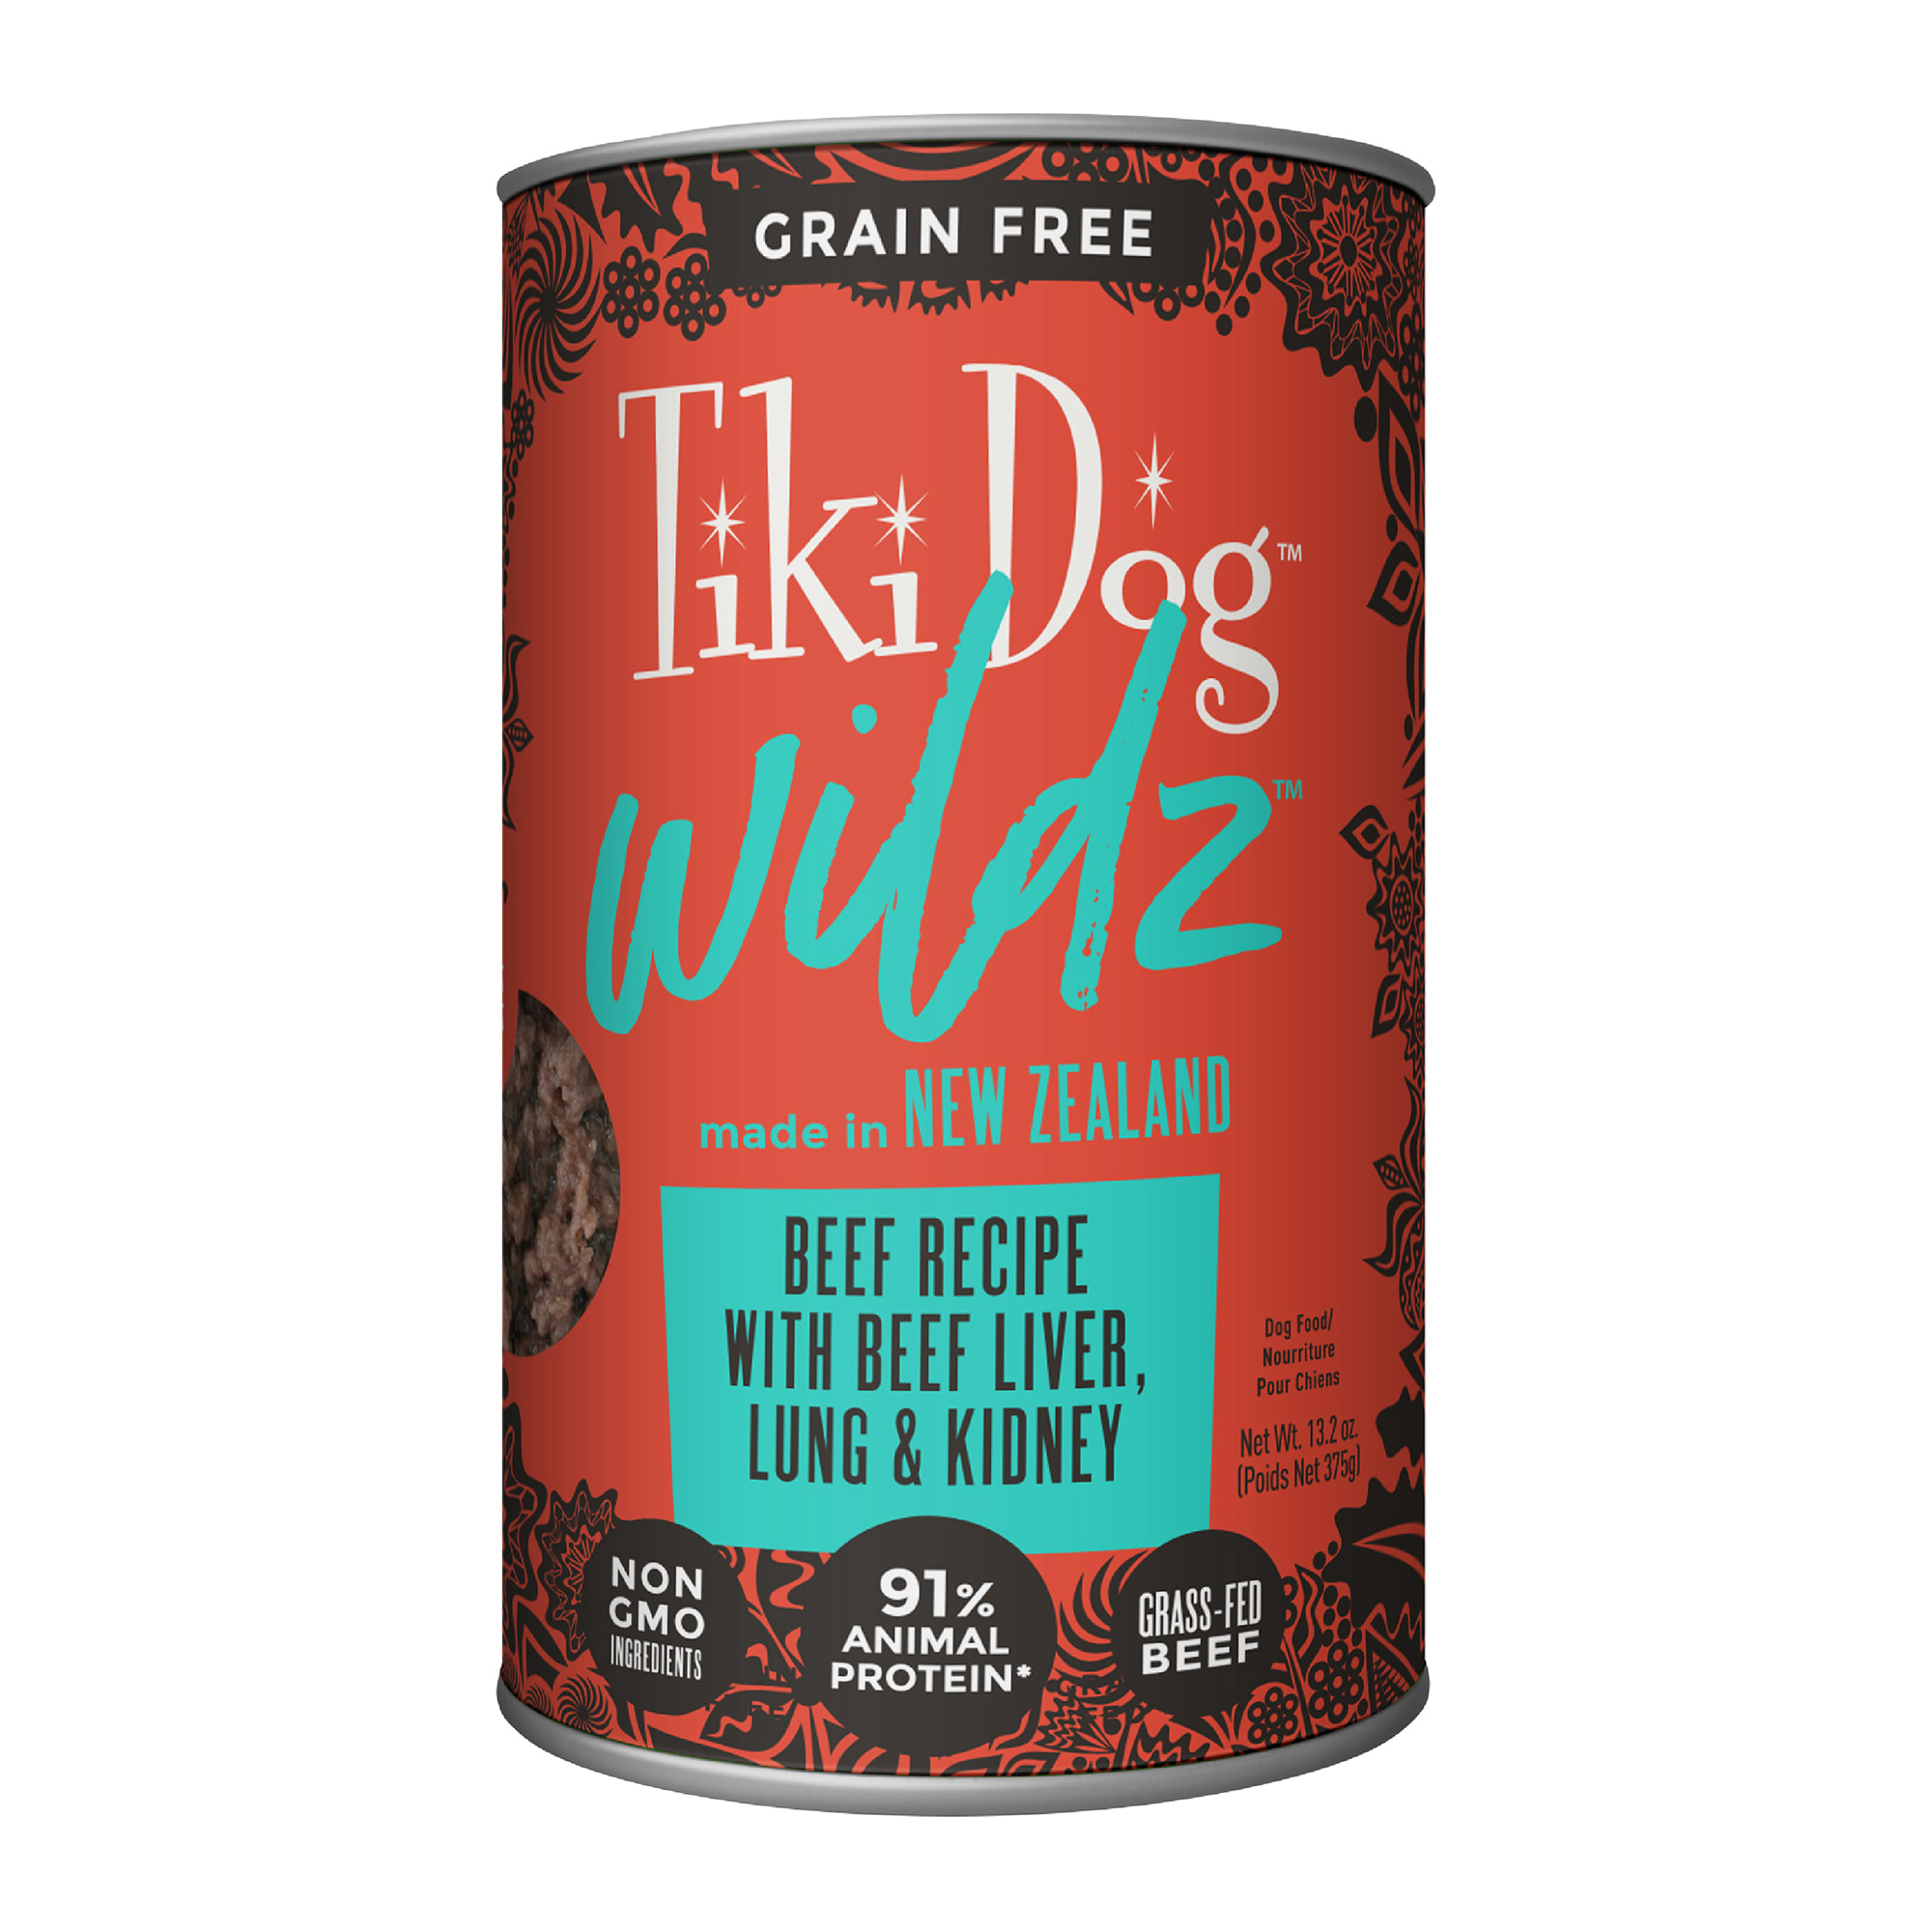 TIKI Dog Canned Food for Dogs, Lomi Lomi Salmon and Chicken Recipe(Pack